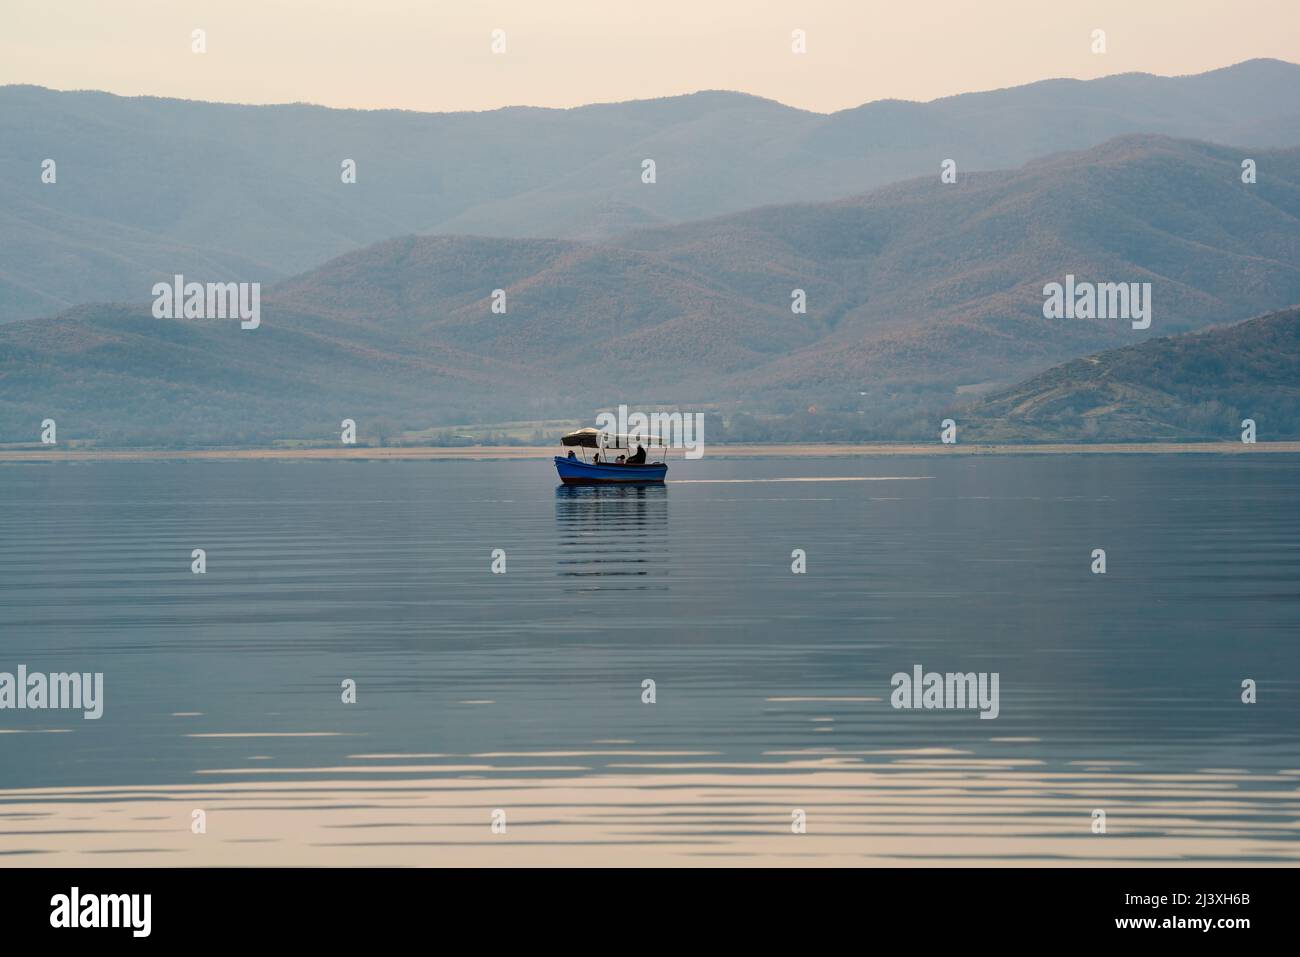 Scenery of boat with people floating in the lake on a beautiful morning light. Picturesque art background of a boat in a lake. Stock Photo